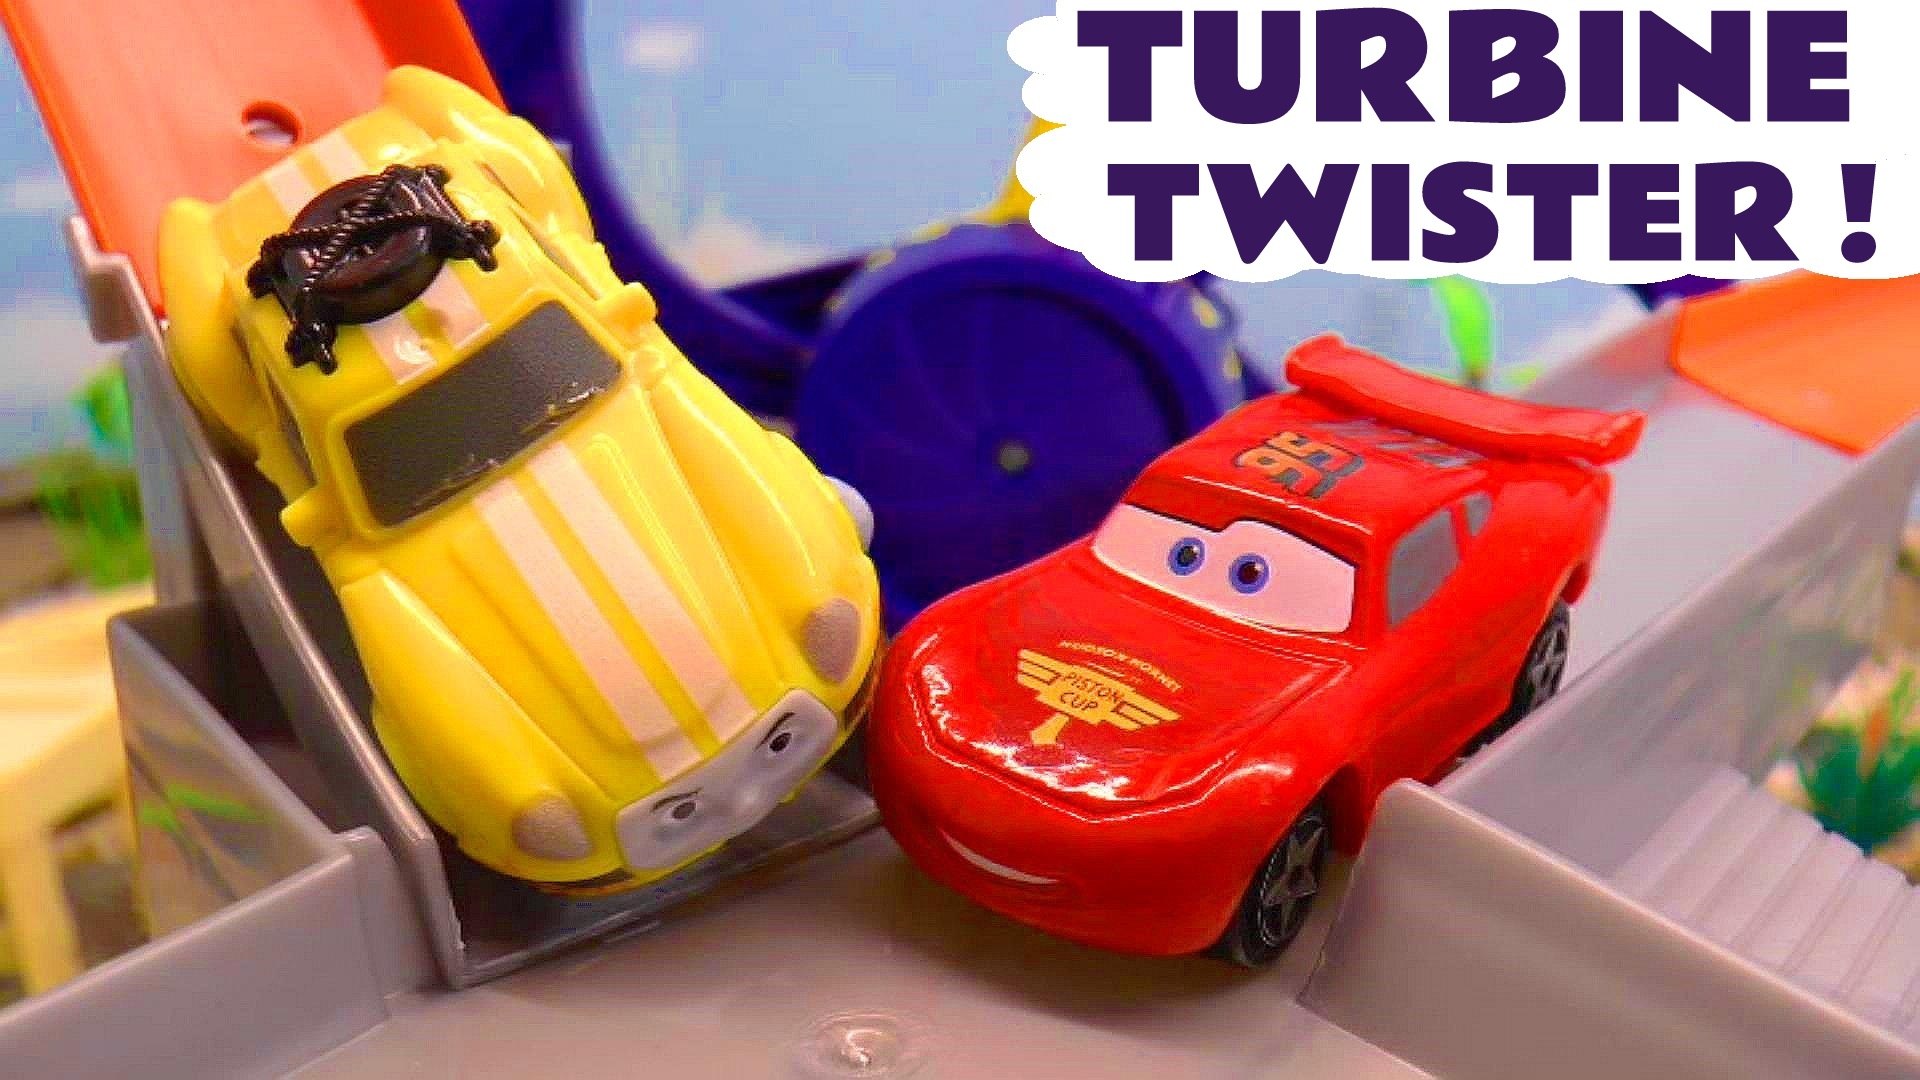 Hot Wheels Turbine Twister with Disney Pixar Cars 3 Lightning McQueen  versus PJ Masks and DC Comics Batman and Marvel Superheroes in this Family  Friendly Full Episode English Toy Story for Kids